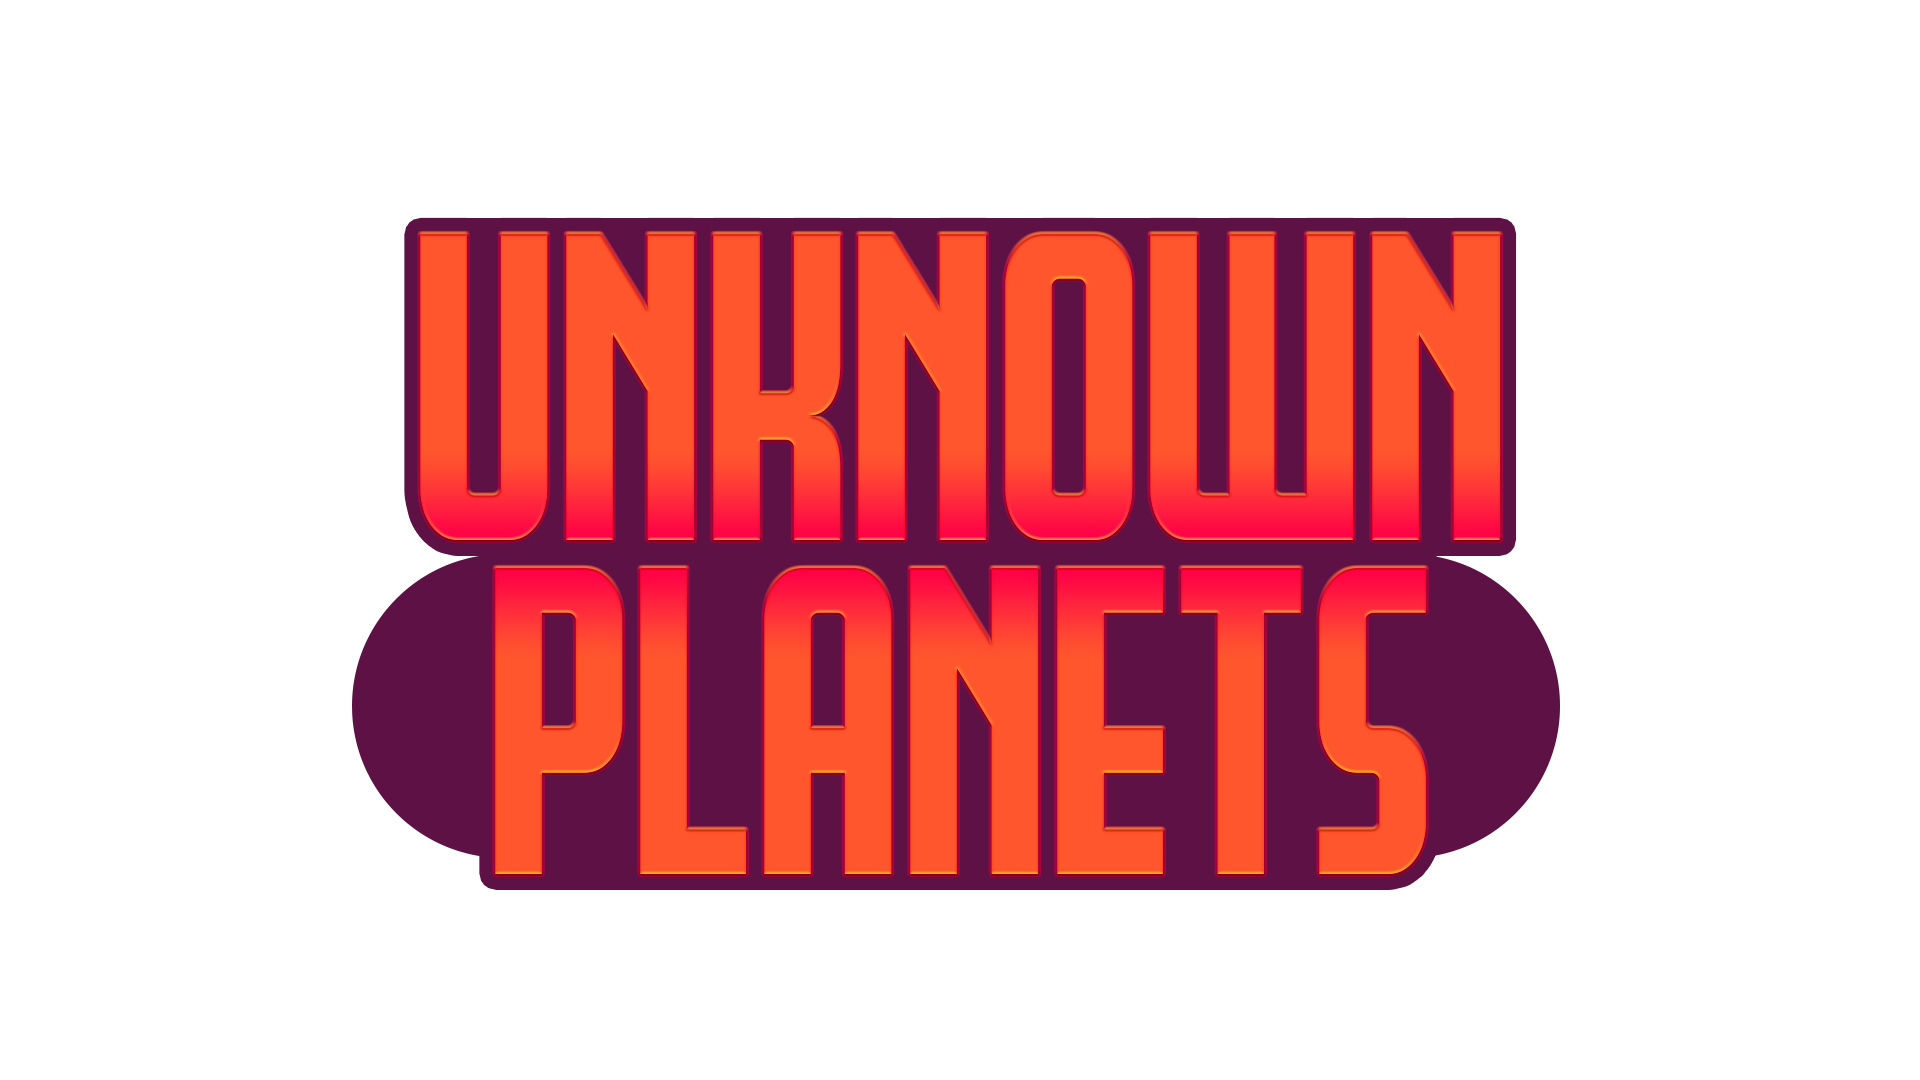 Unknown Planets